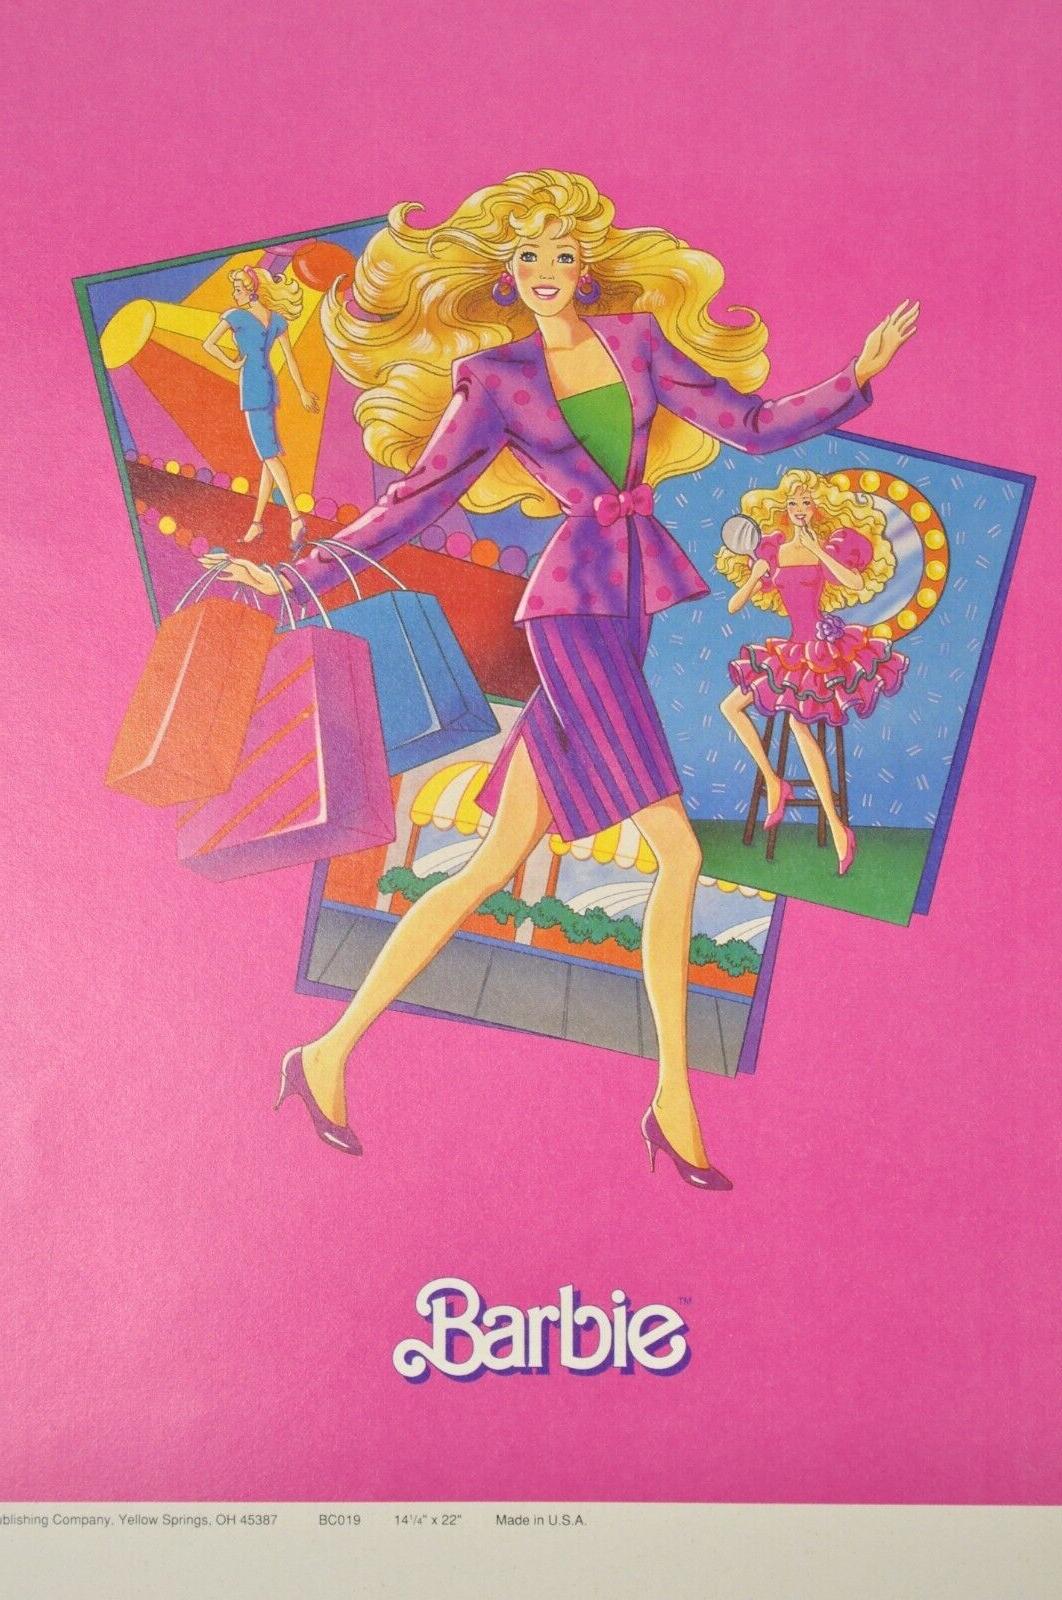 Vintage 1989 Barbie Mattel Original Pink Paper Book Covers NOS - Many Available For Sale 4